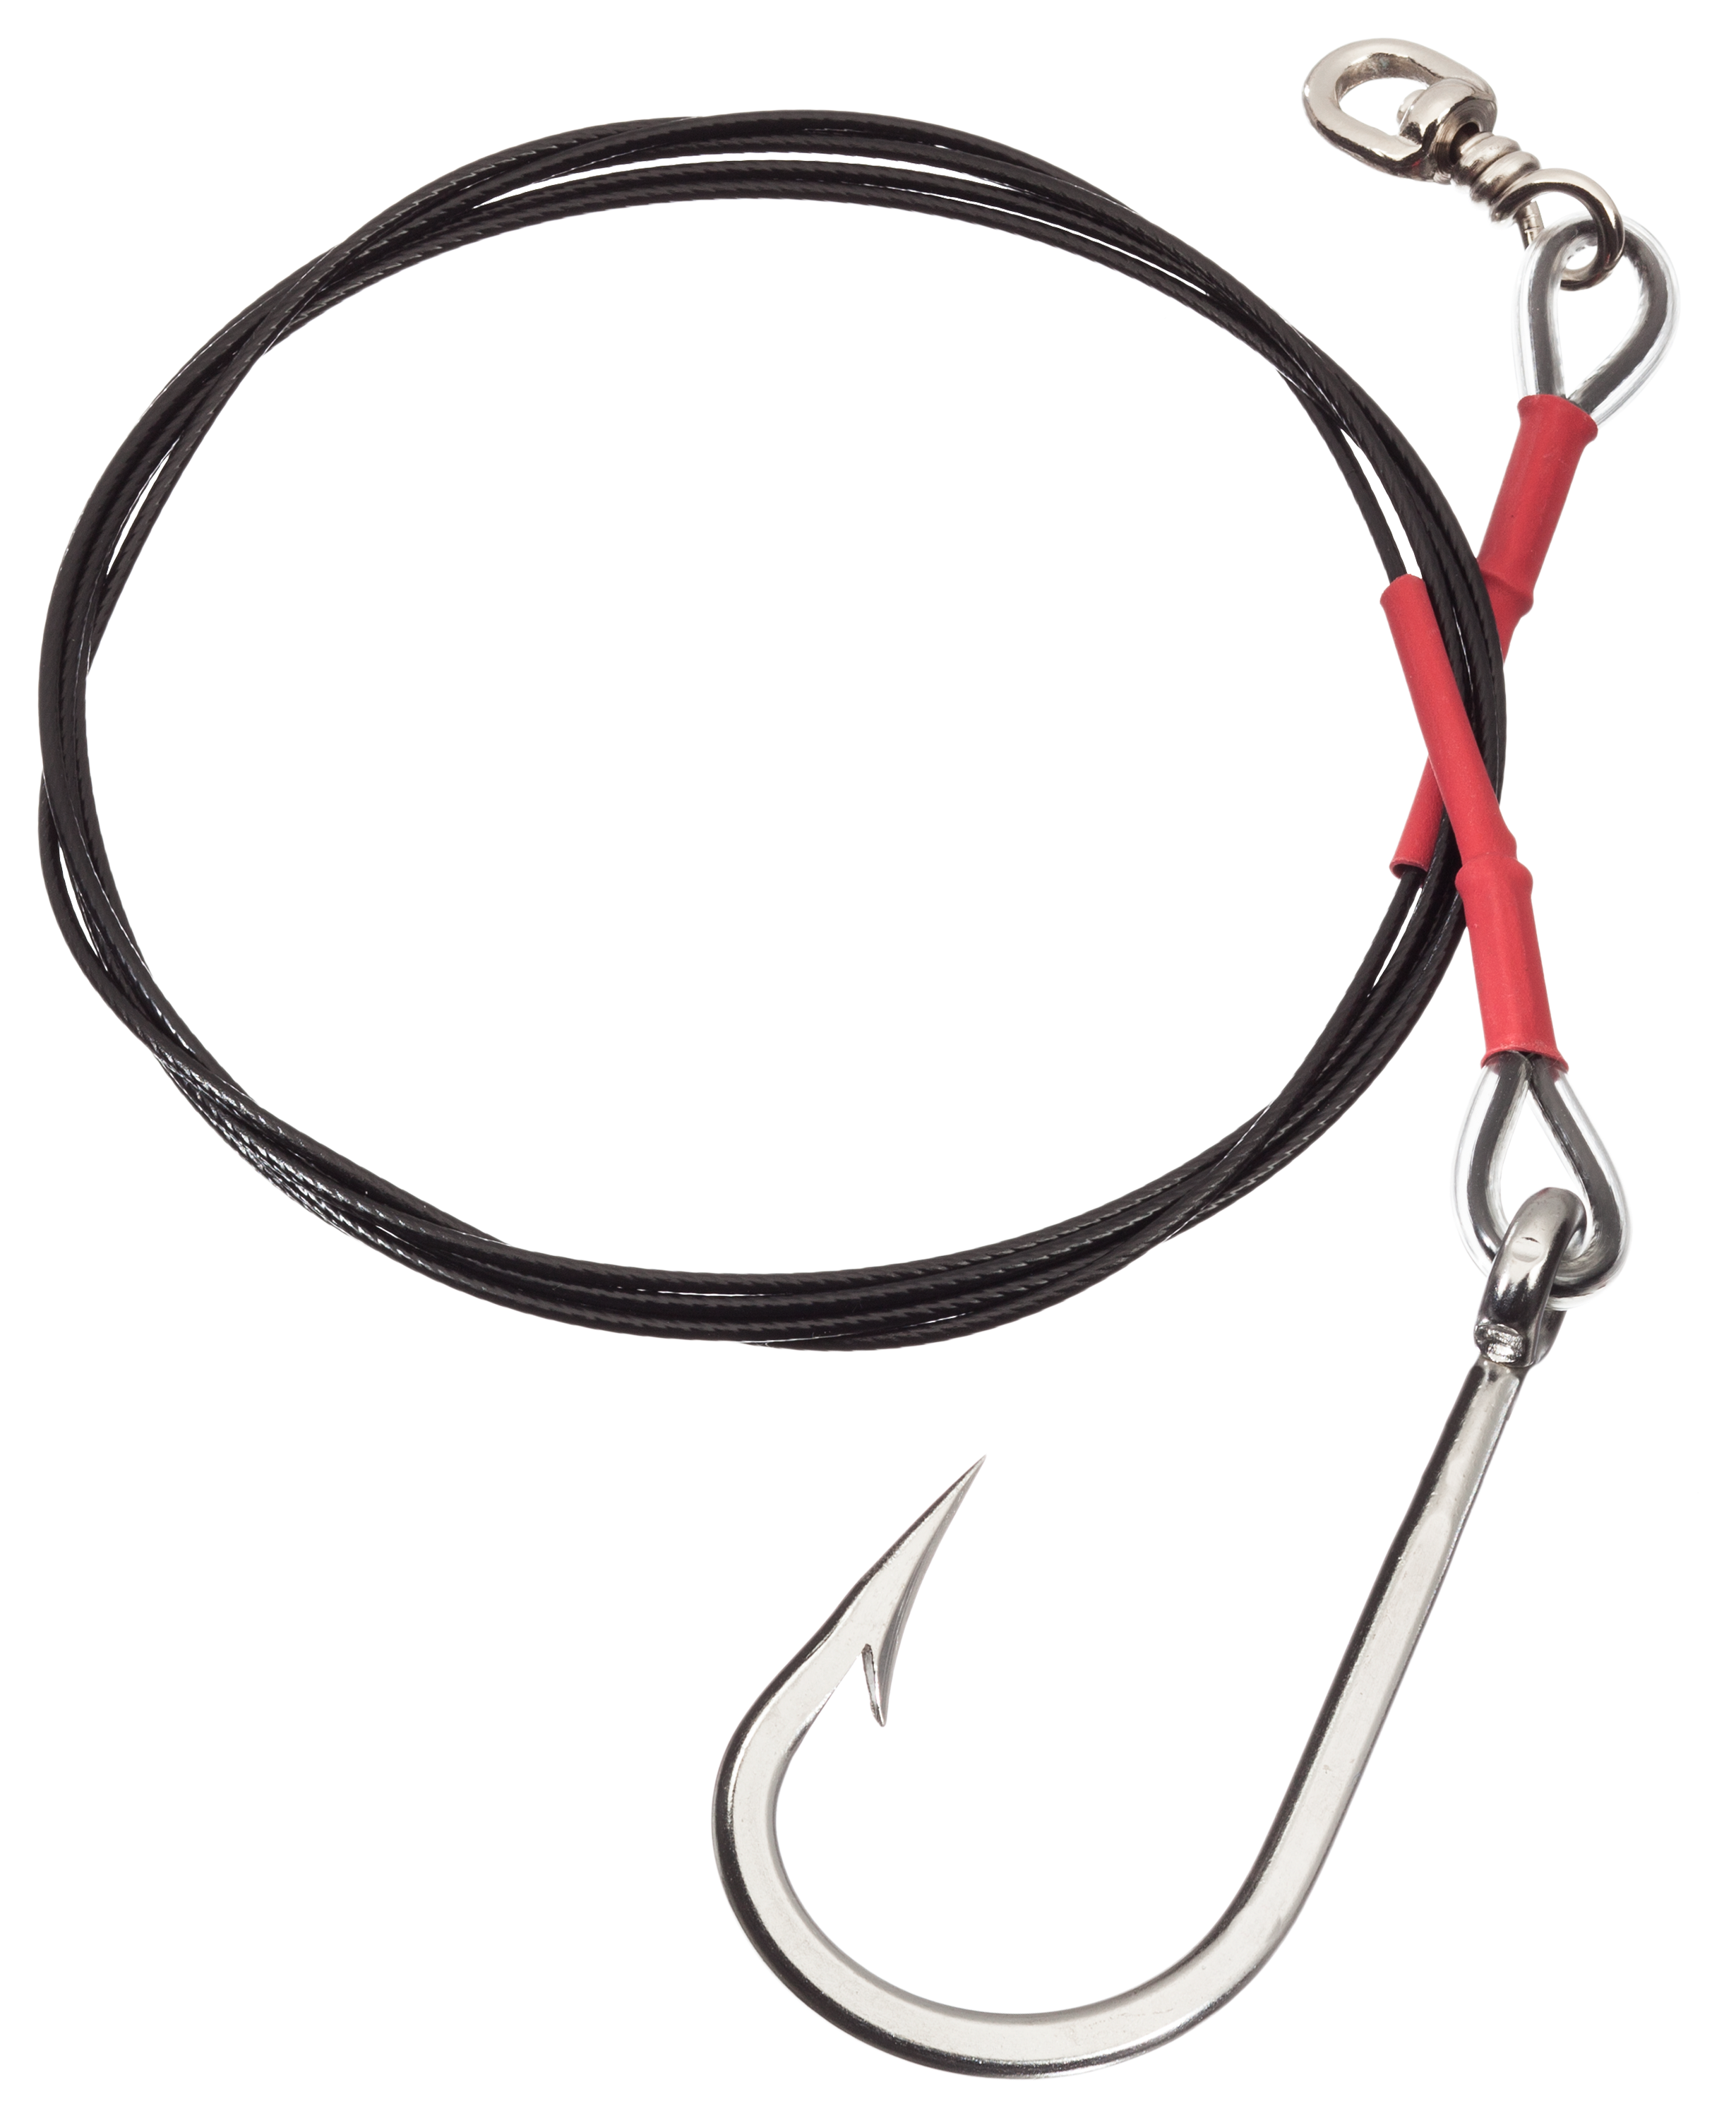 Malin J-Hook Stainless Steel Cable Shark Rig